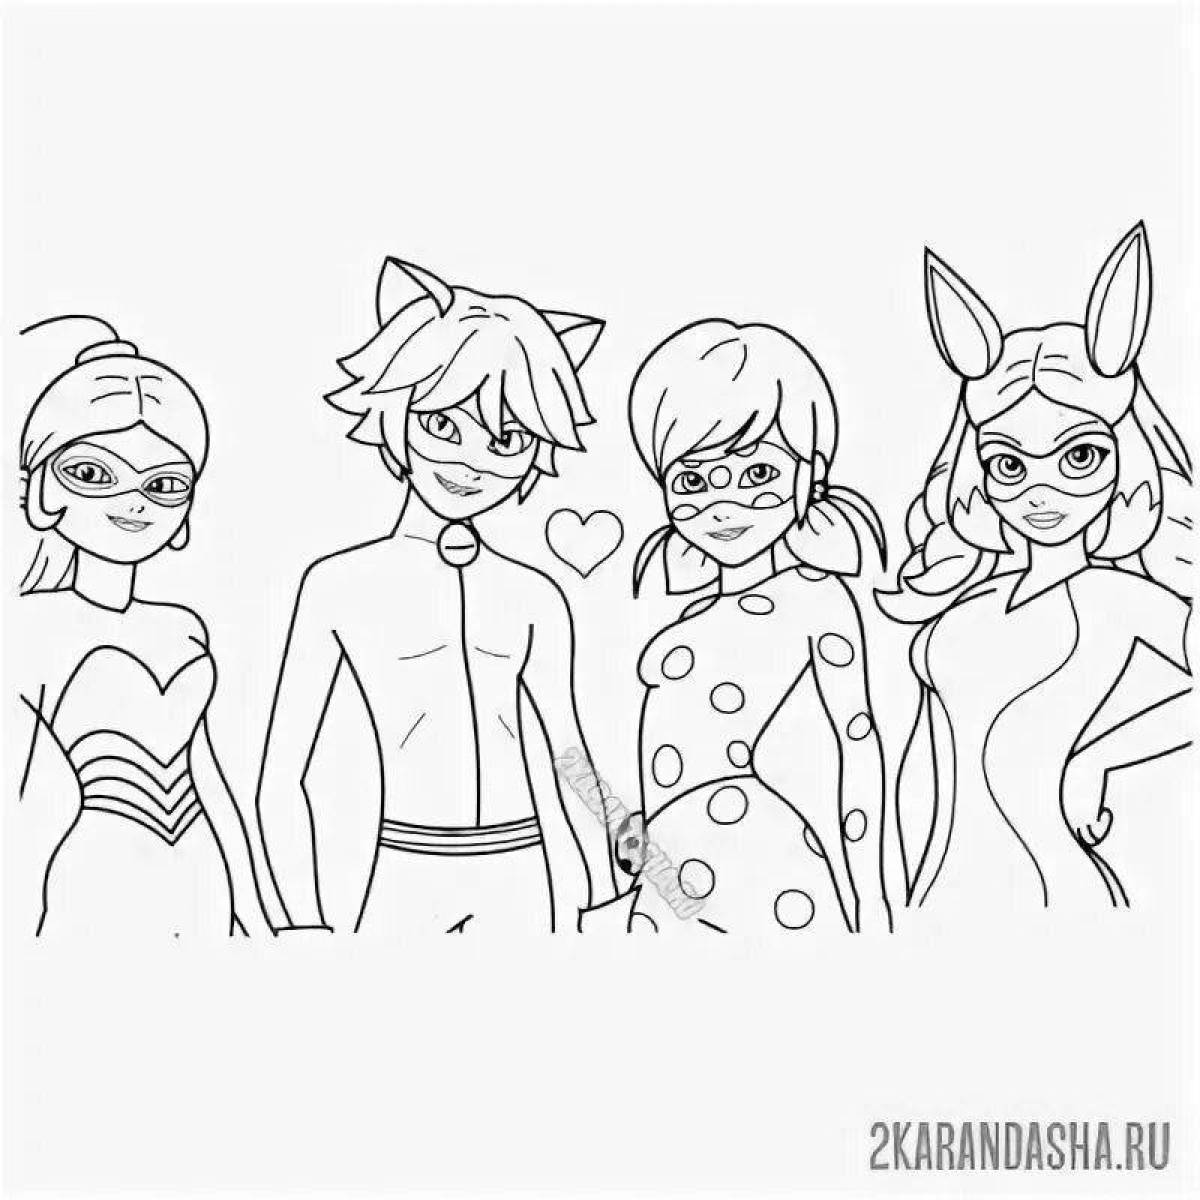 Coloring page bright team lady bug